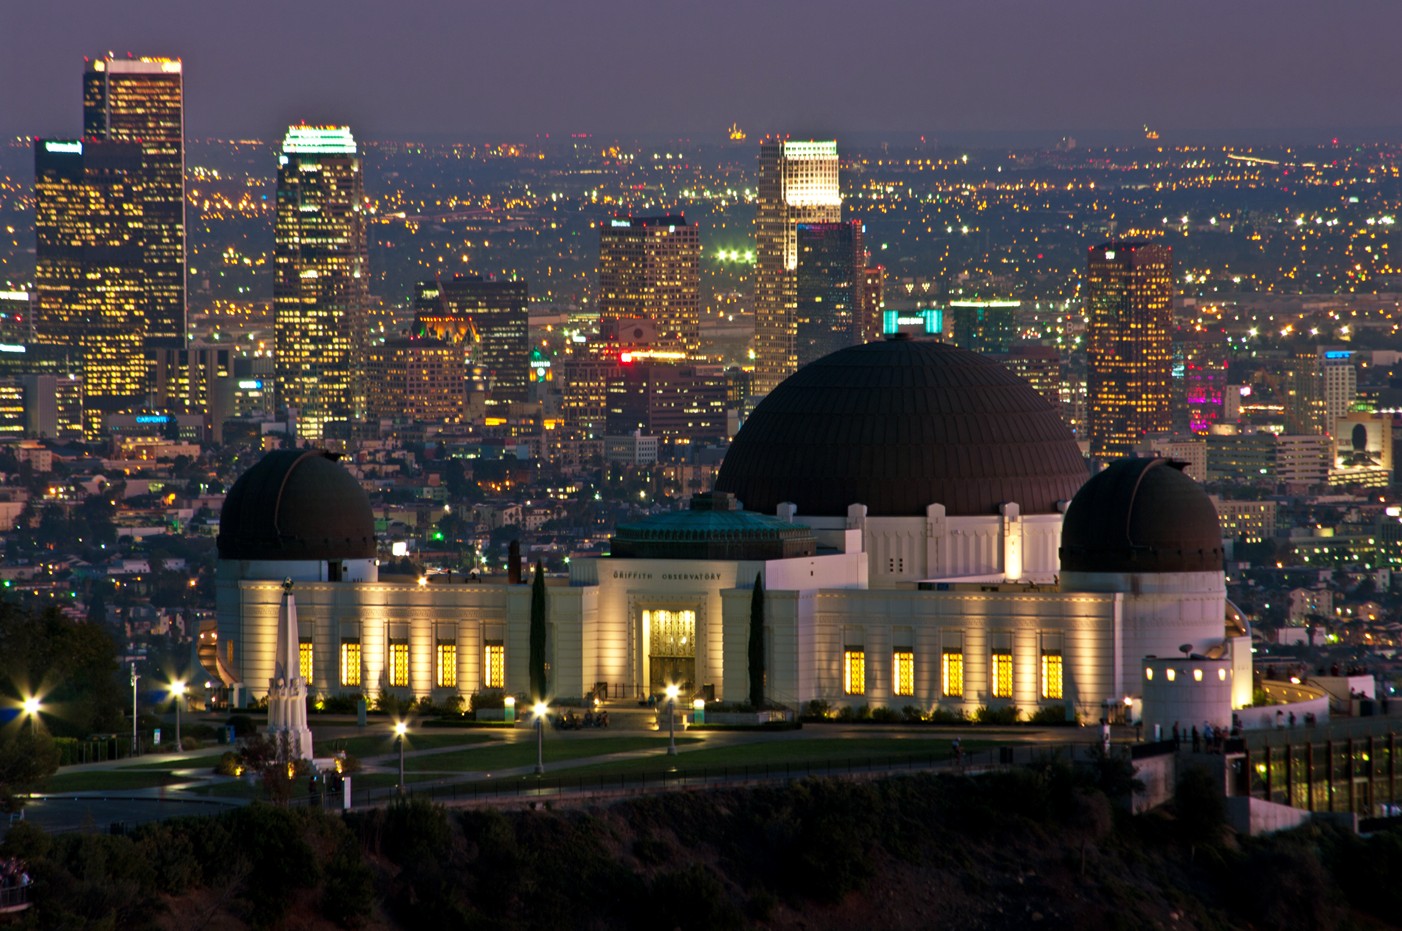 Griffith Park Observatory - 2014